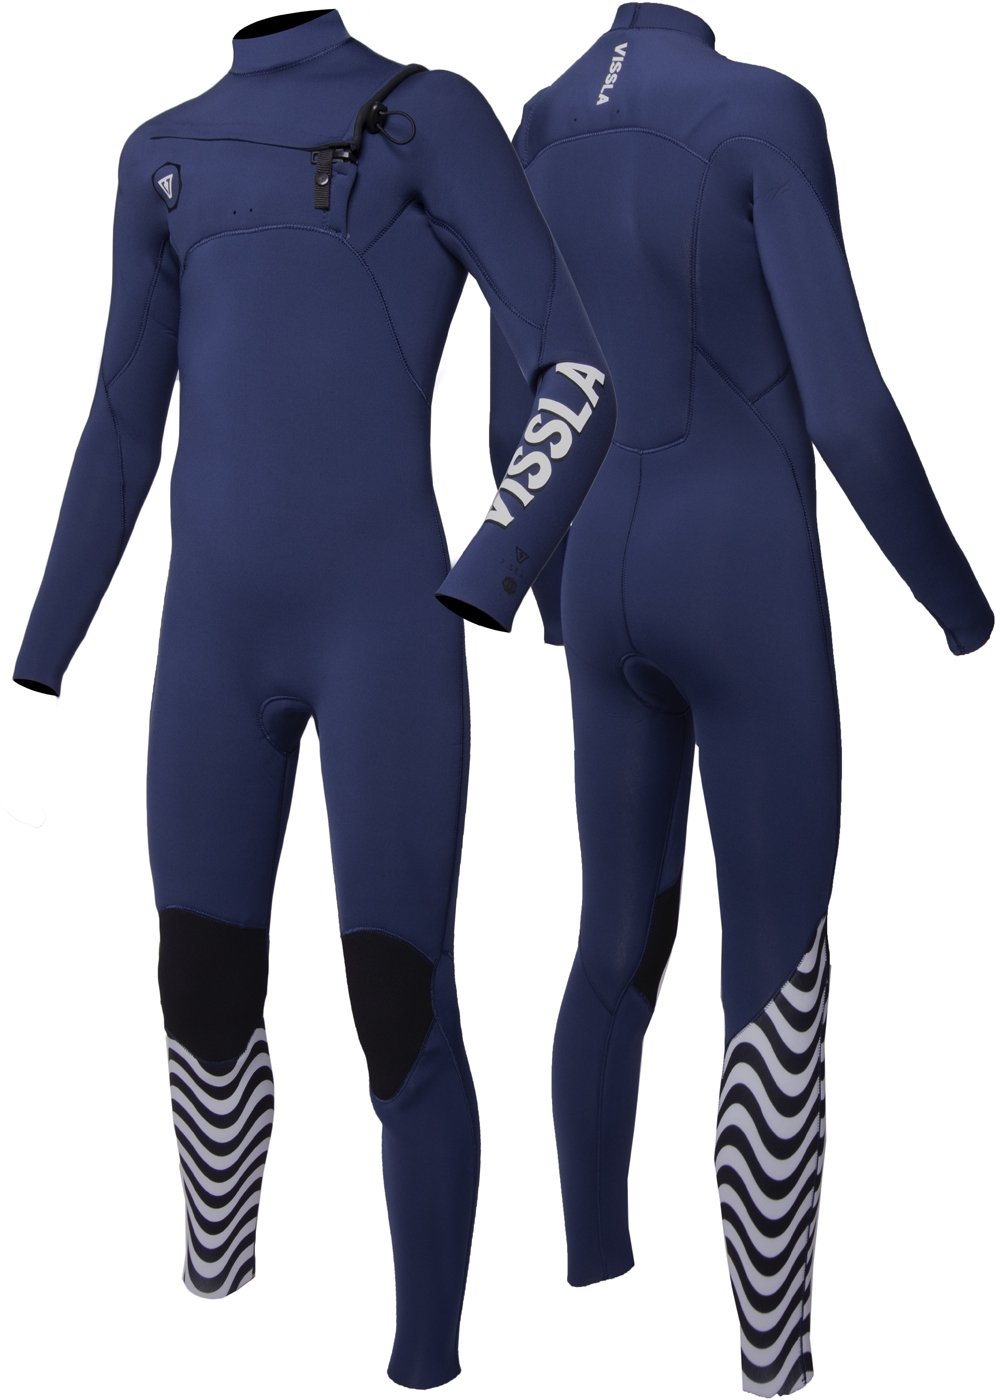 Vissla Boys Navy 7 Seas 3-2 chest zip full wetsuit. front and back view